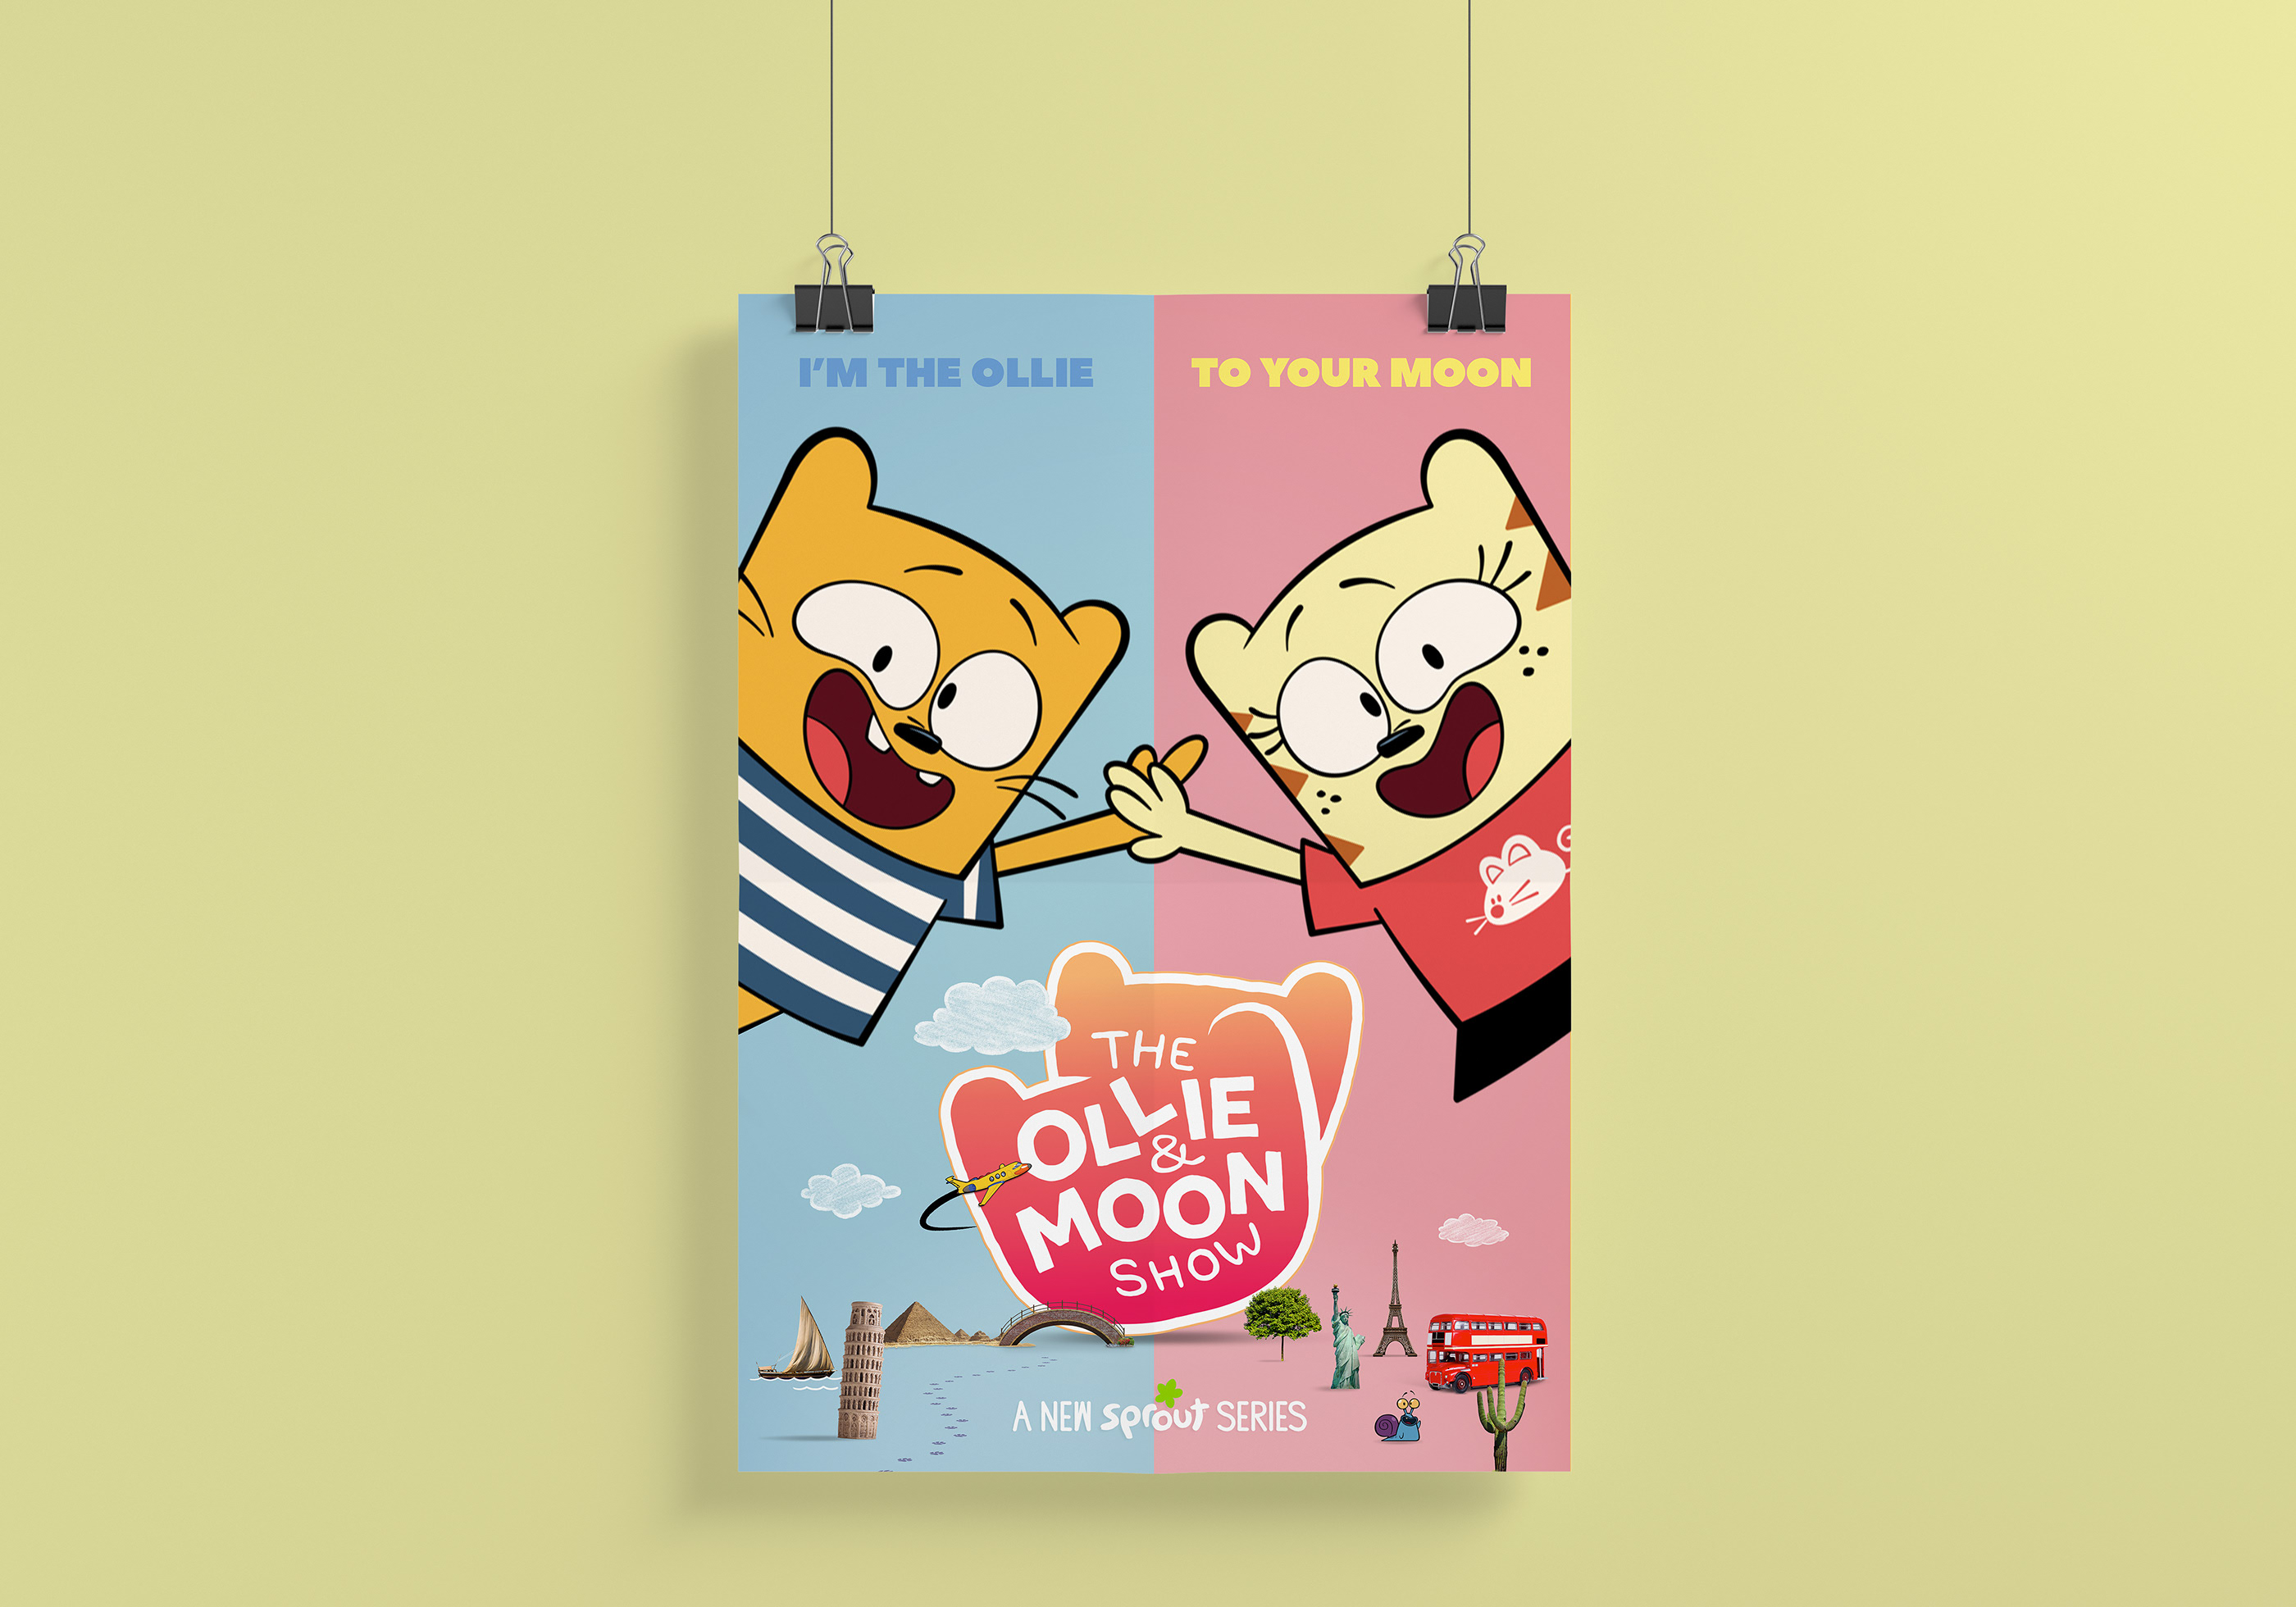 The Ollie & Moon Show Launch Campaign